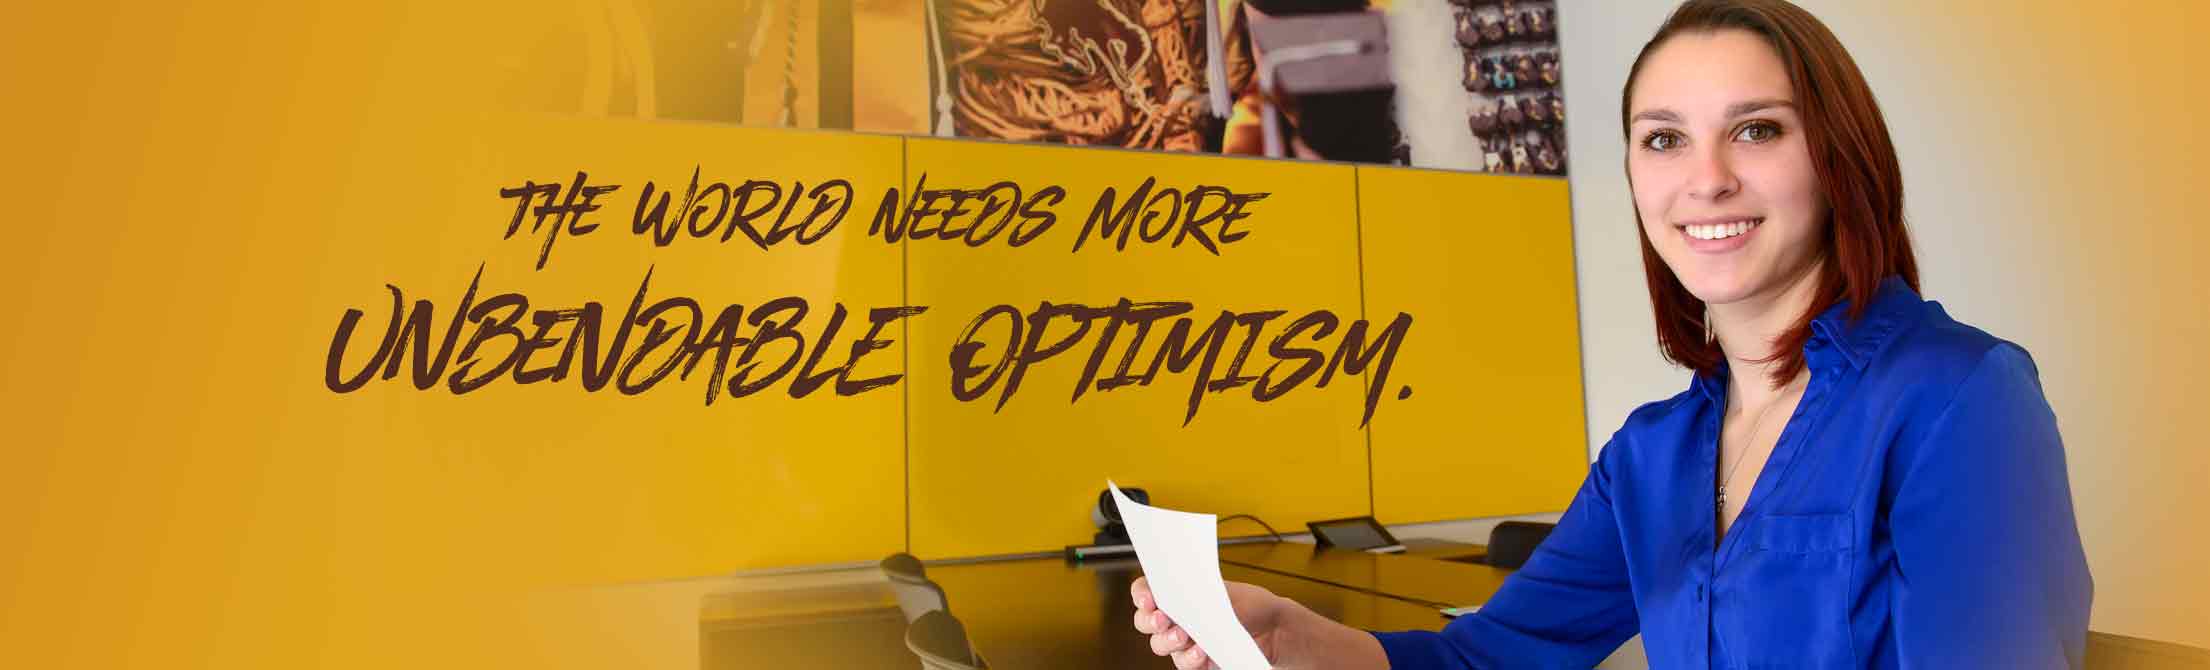 The World Needs More Unbendable Optimism. 